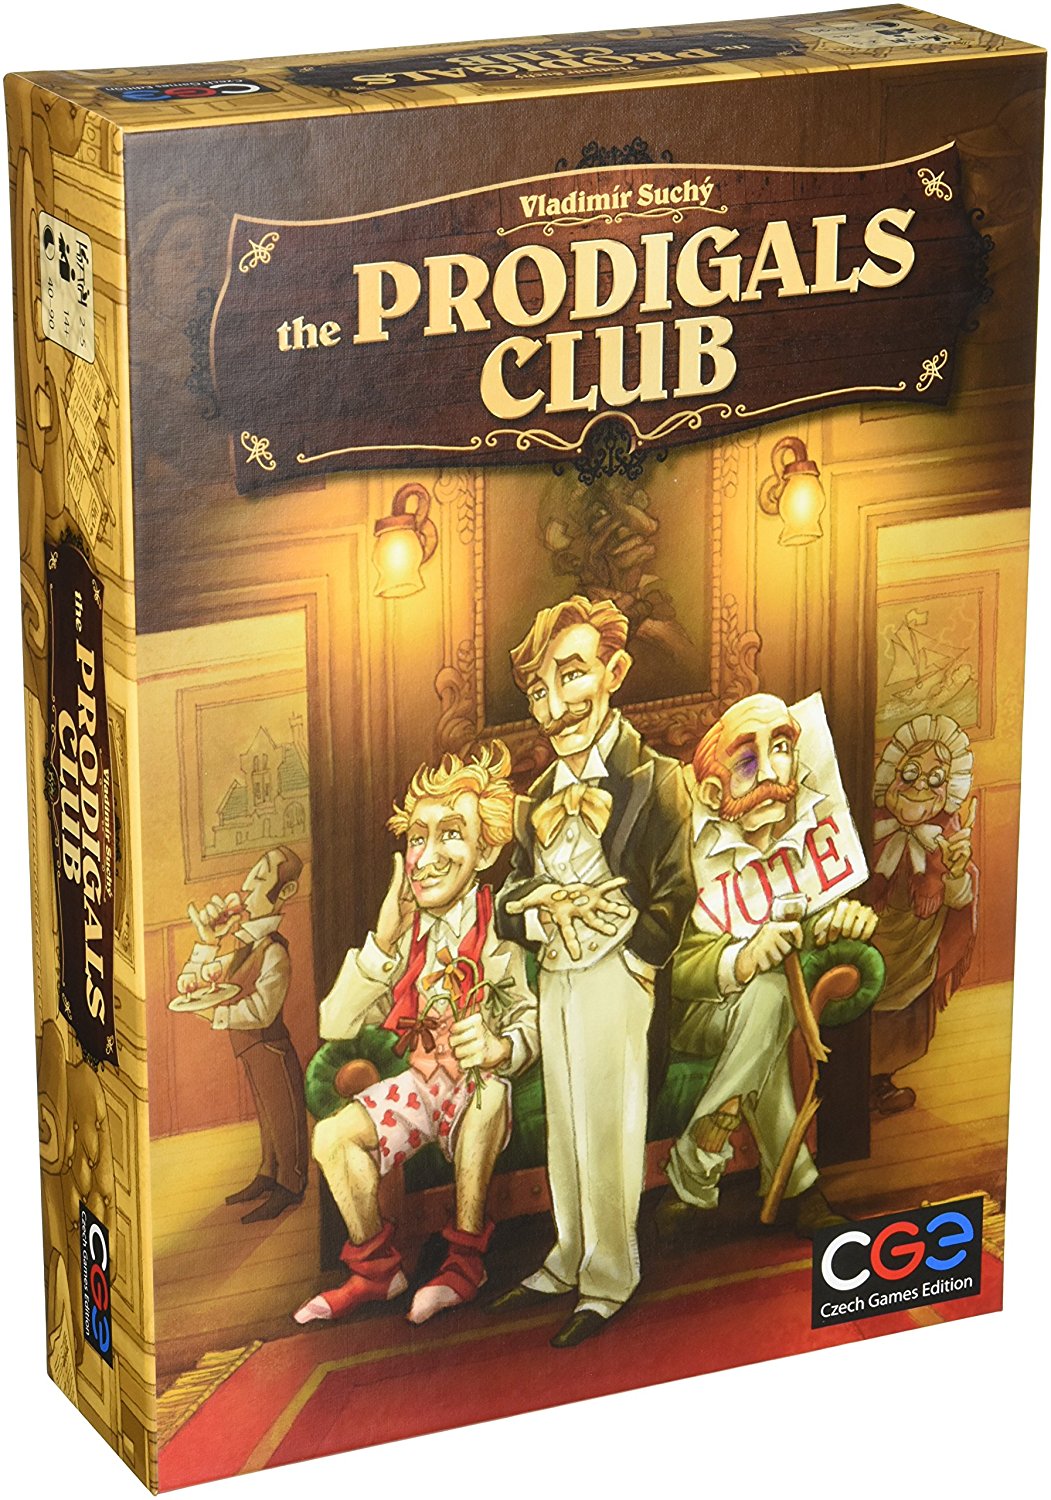 The Prodigals Club / base game